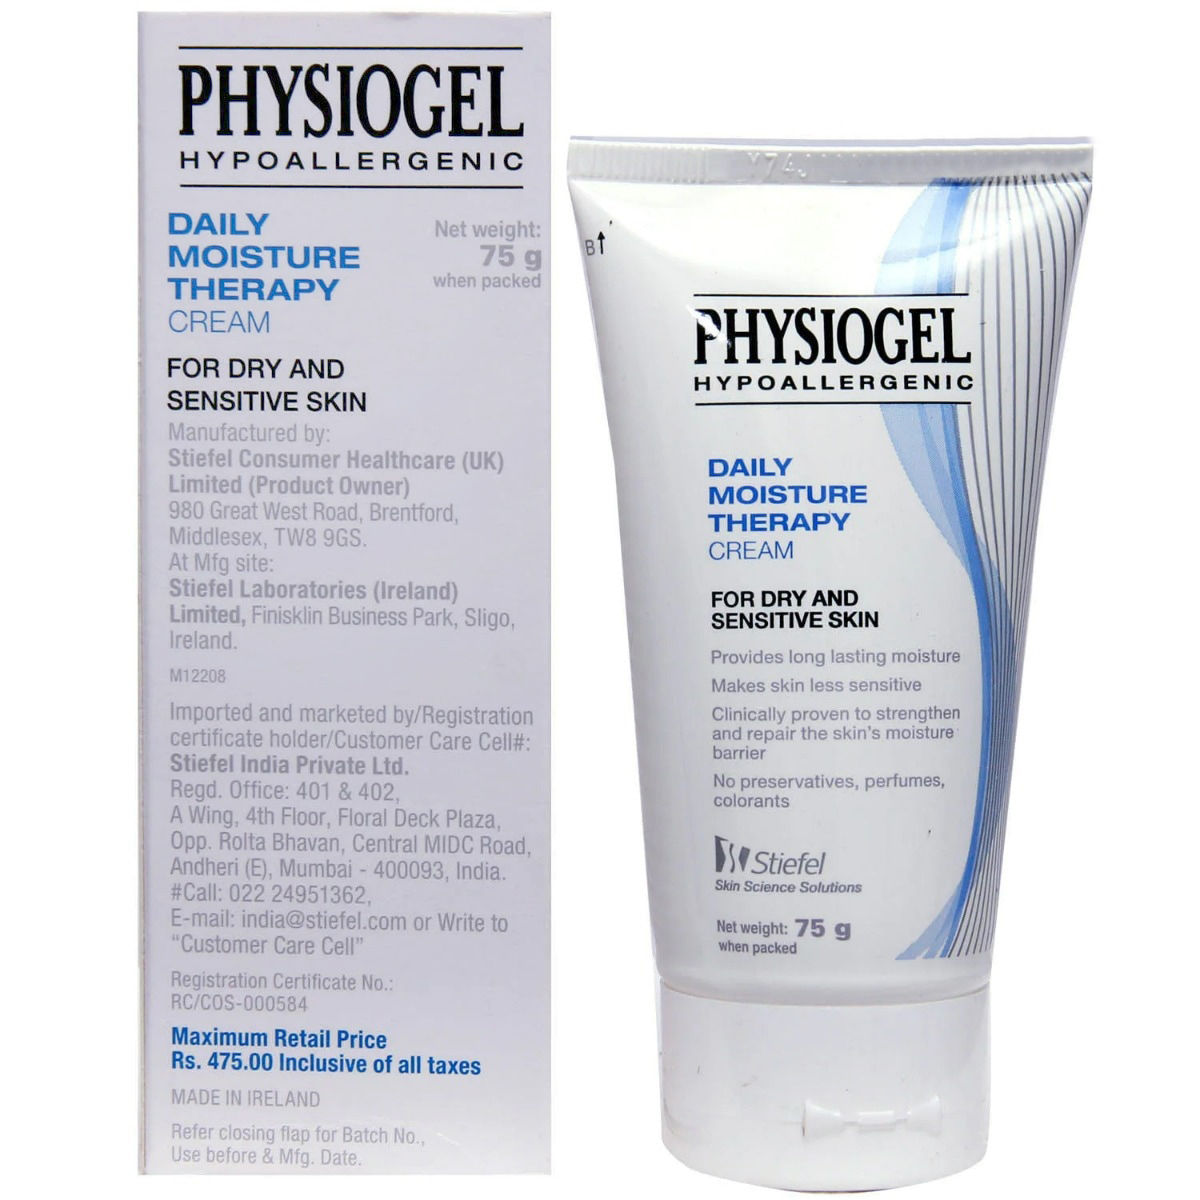 Physiogel Hypoallergenic Daily Moisture Therapy Cream 75 gm, Pack of 1 